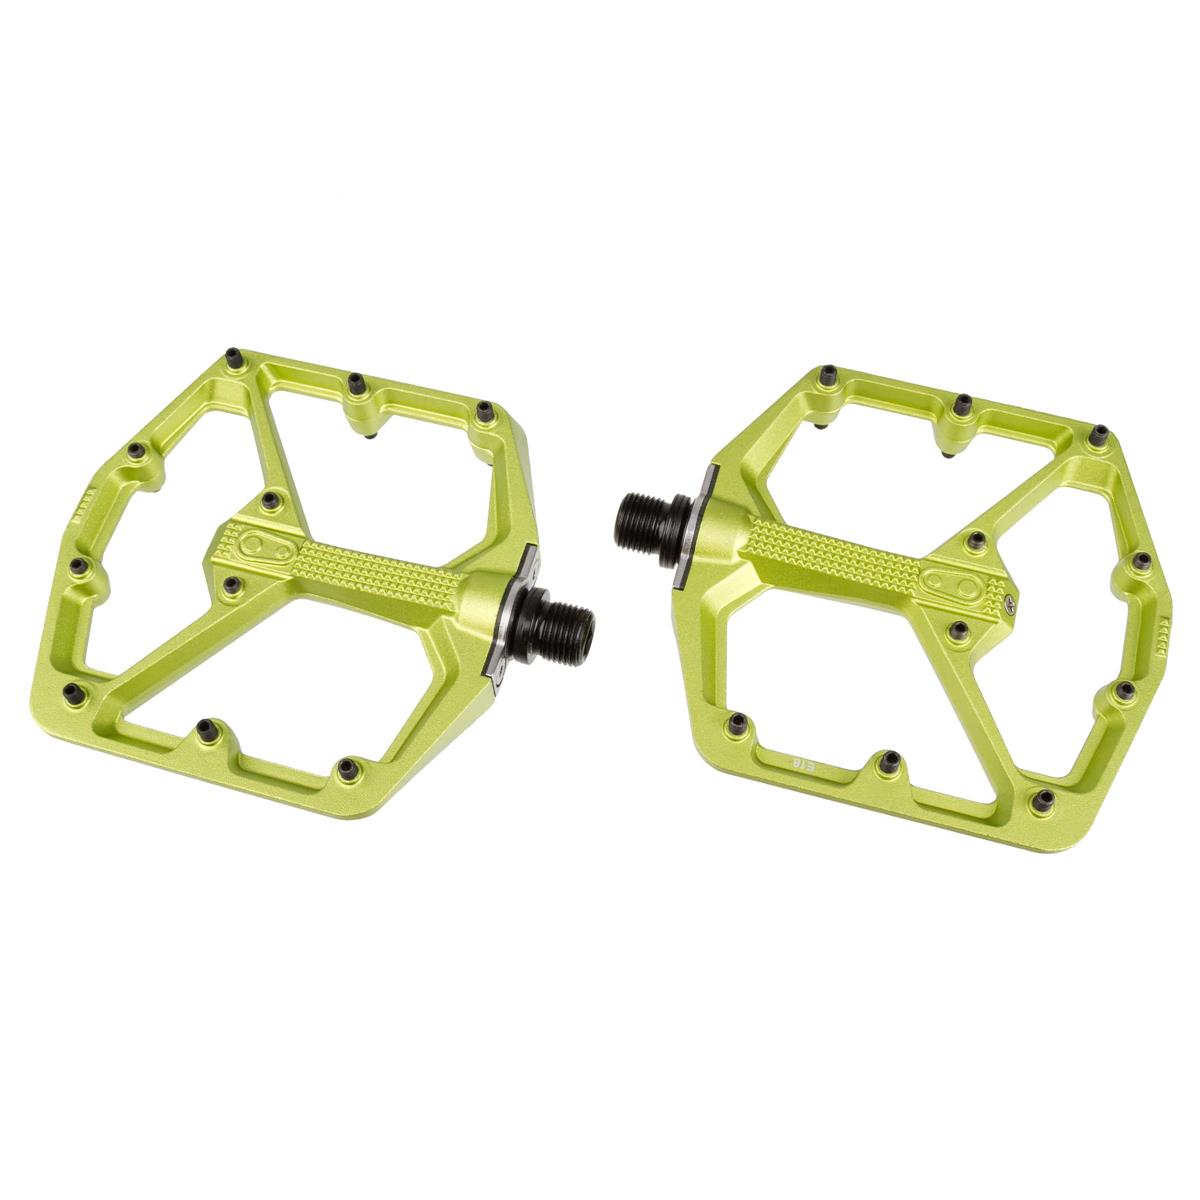 Crankbrothers Pédales Stamp 7 Limited Edition, Green, Large